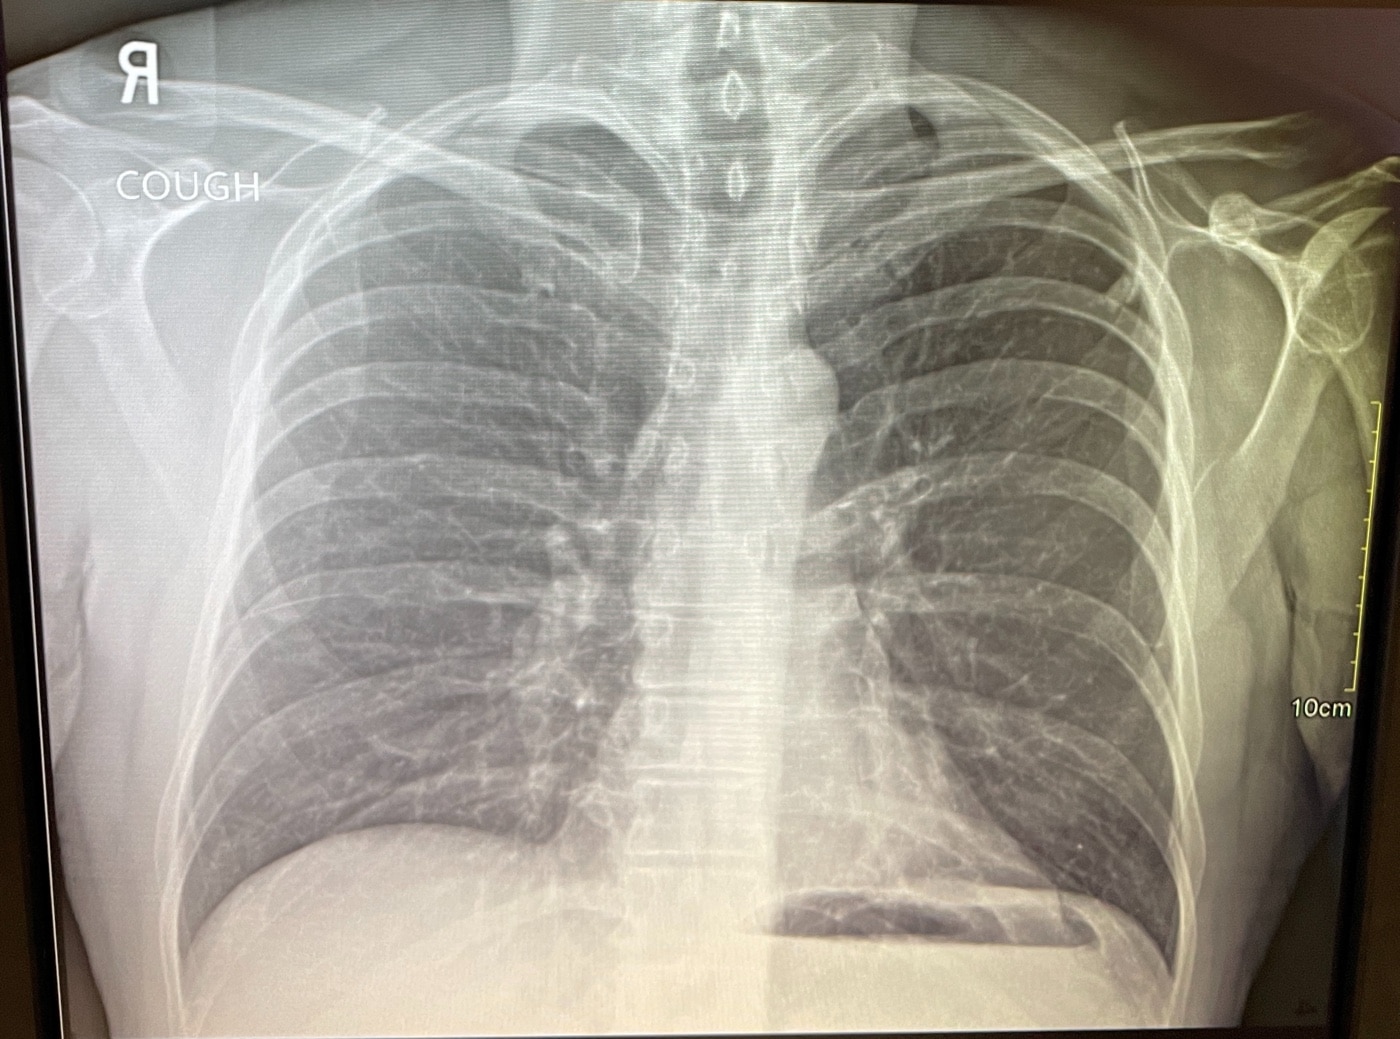 In this photograph, we see an x-ray of chest cavity. The dark areas are empty air sacs.